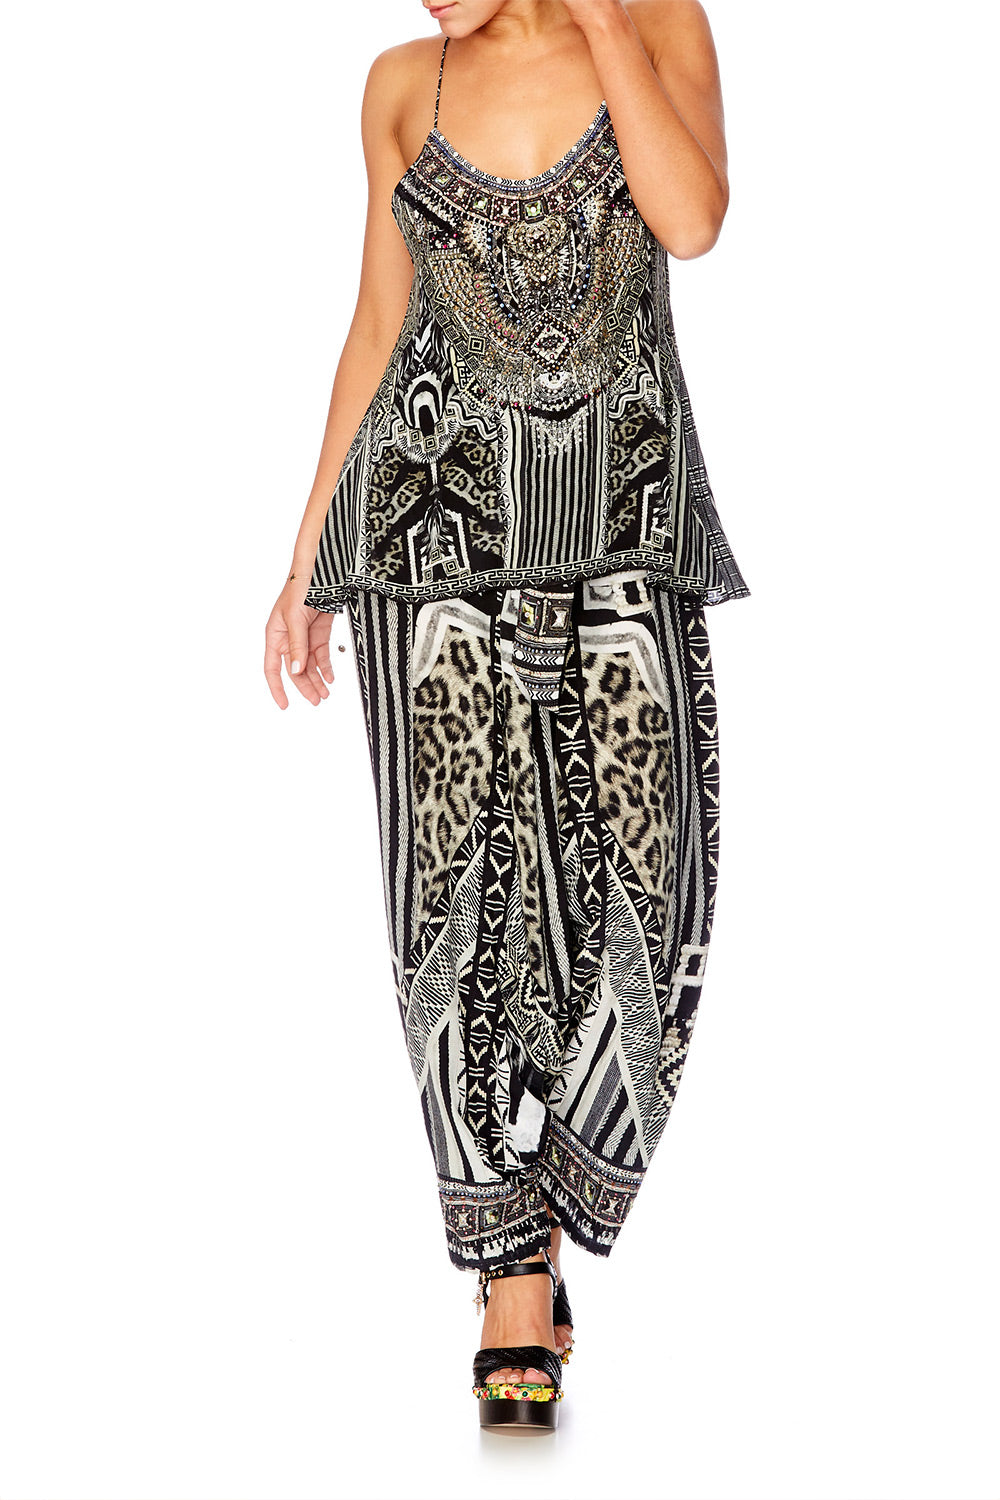 TRIBAL THEORY T BACK SHOESTRING TOP